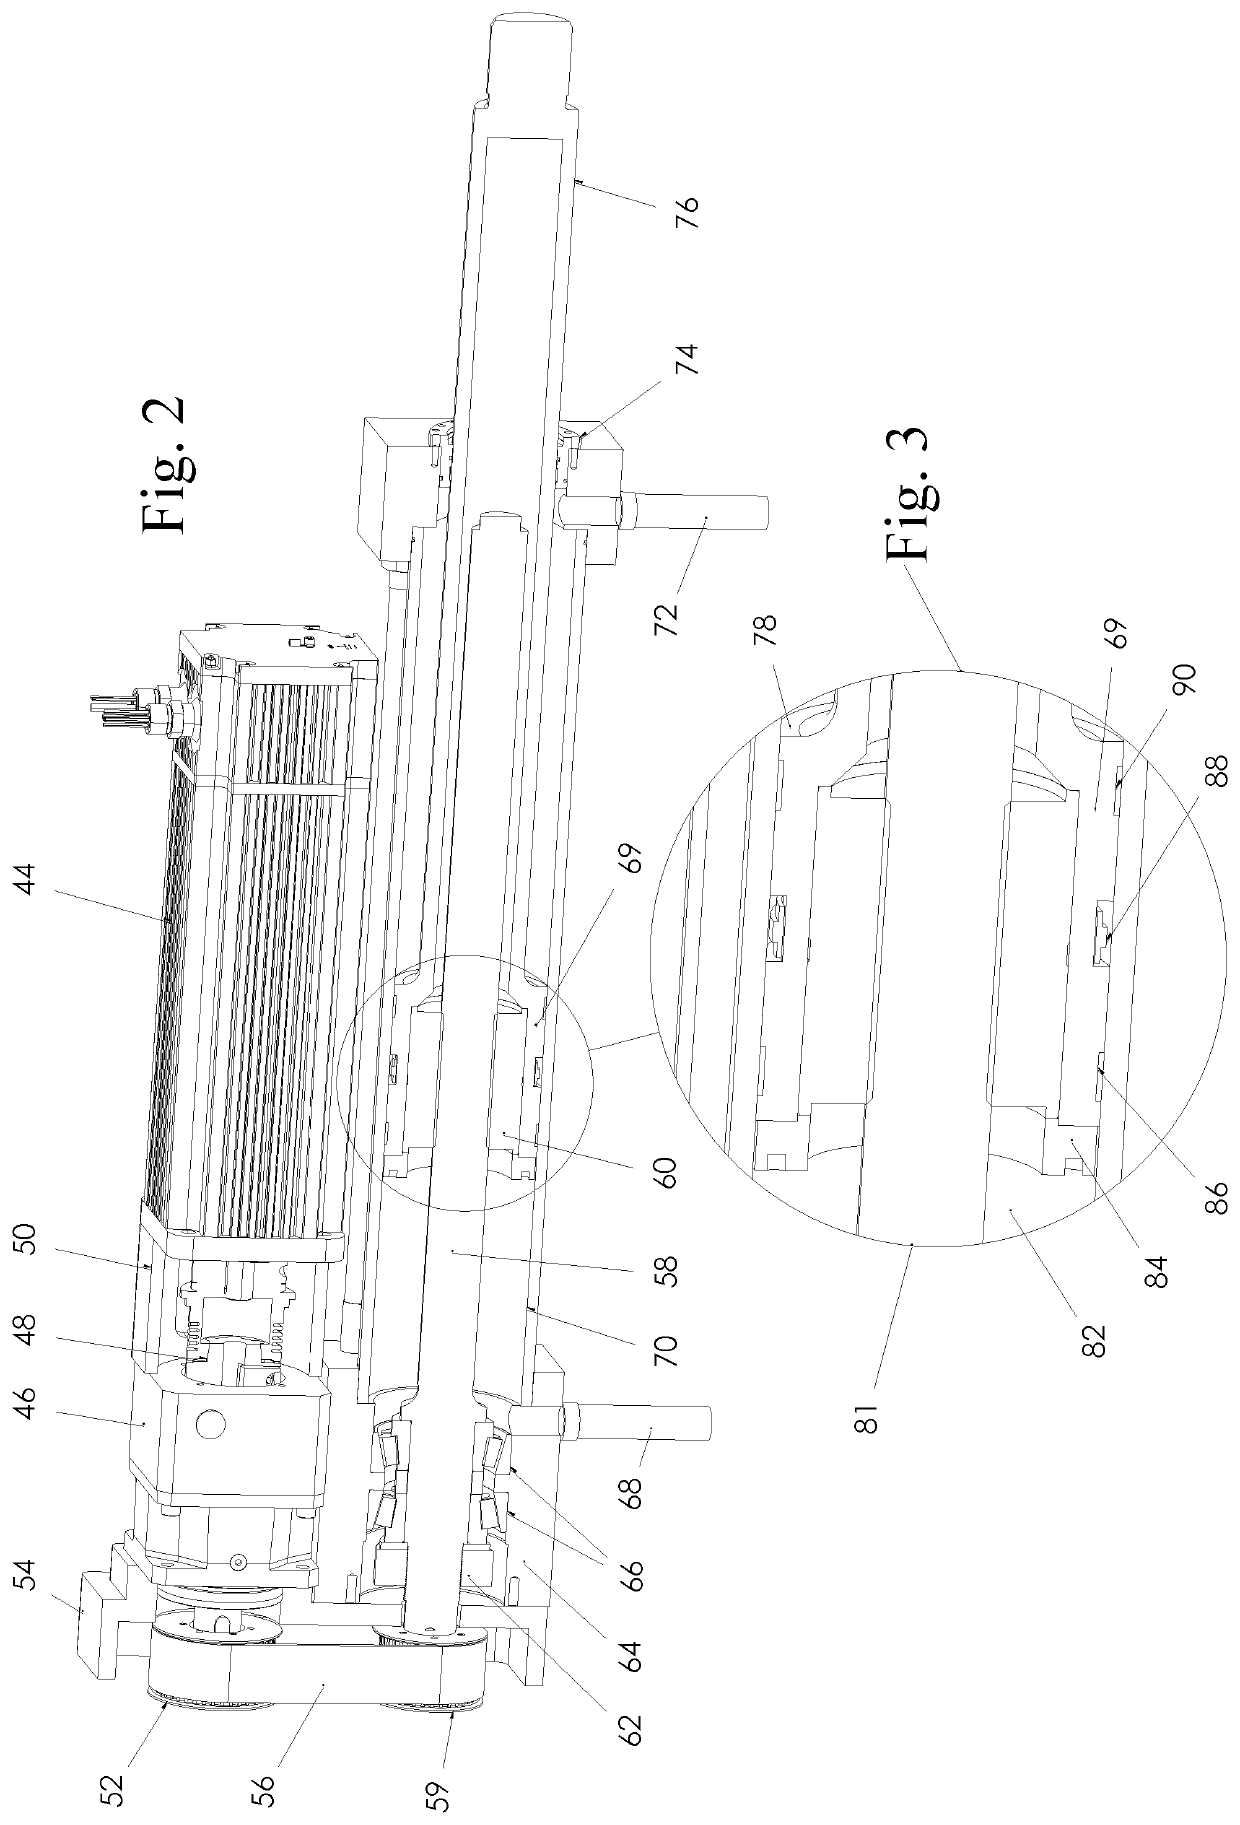 Space-constrained hybrid linear actuator